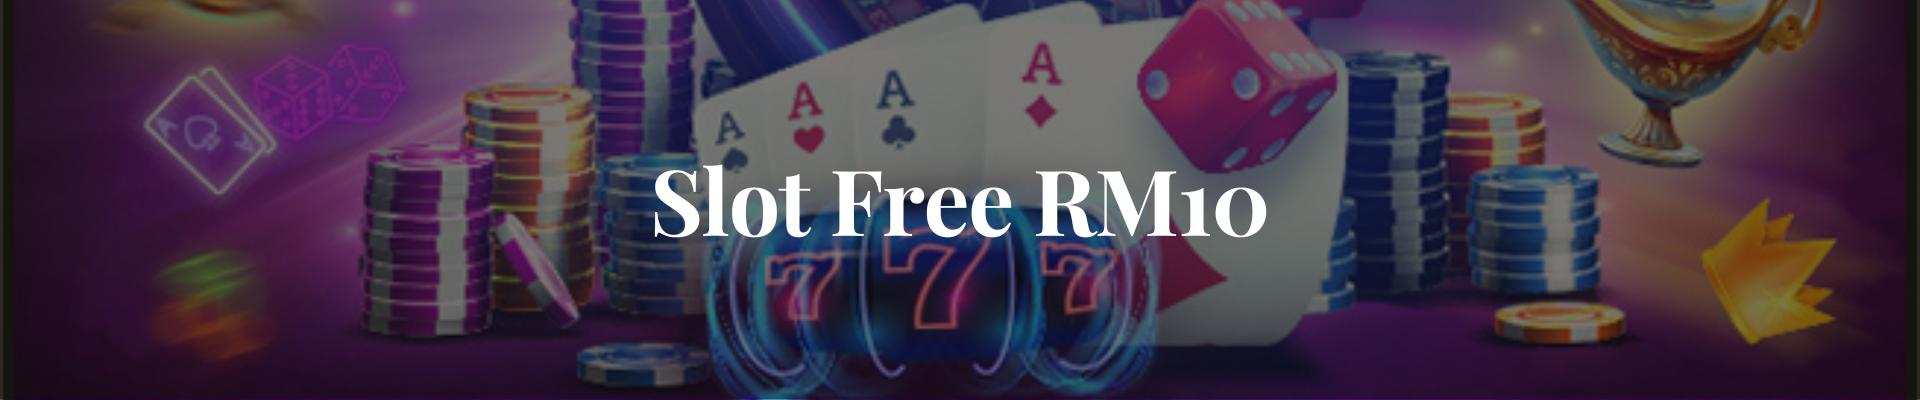 Claim Slot Free RM10 Promotion and Play for Free - Join Now